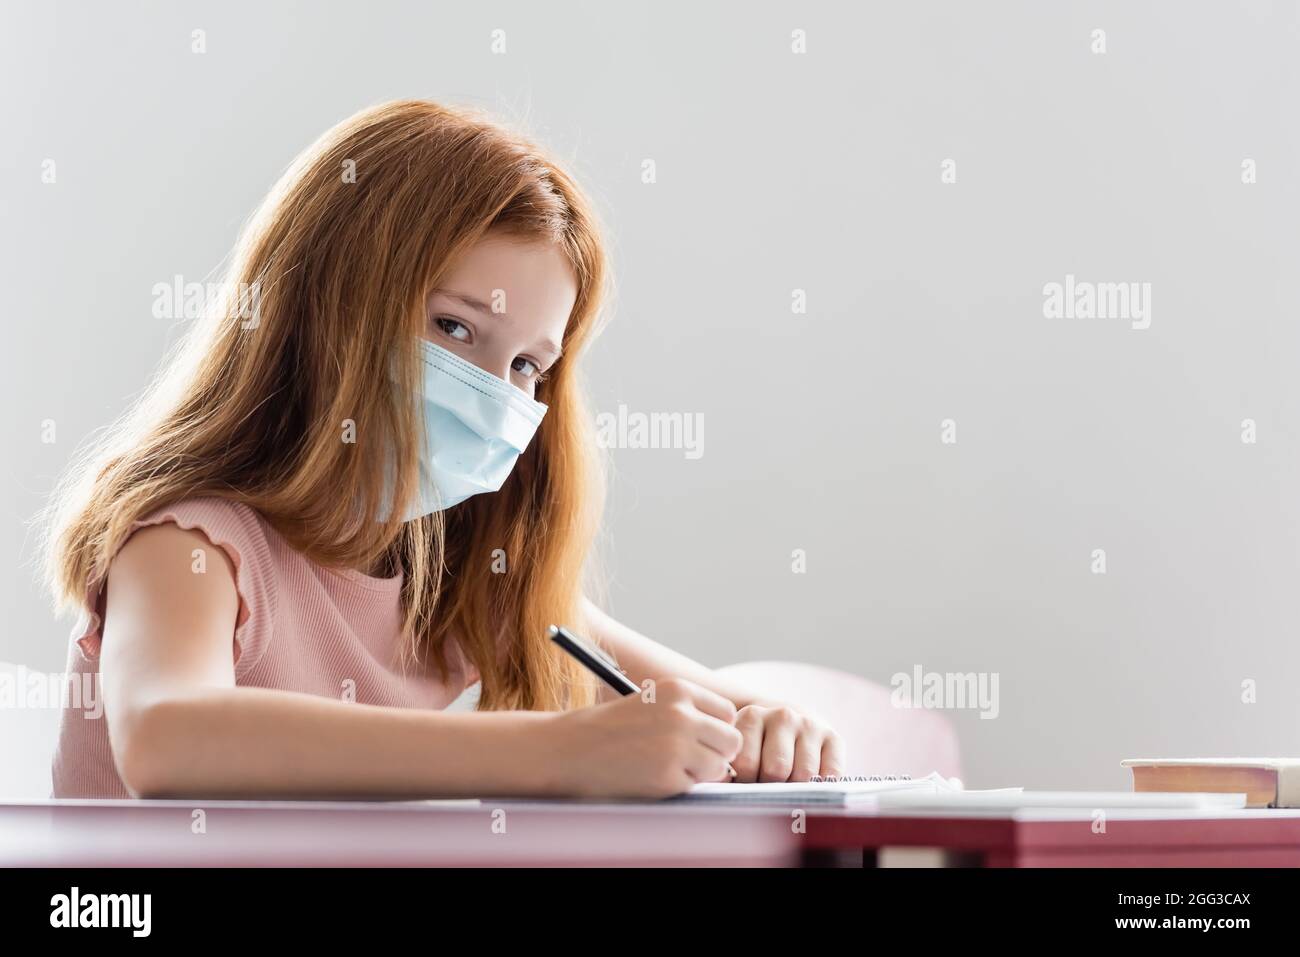 schoolgirl in medical mask writing during school lesson Stock Photo